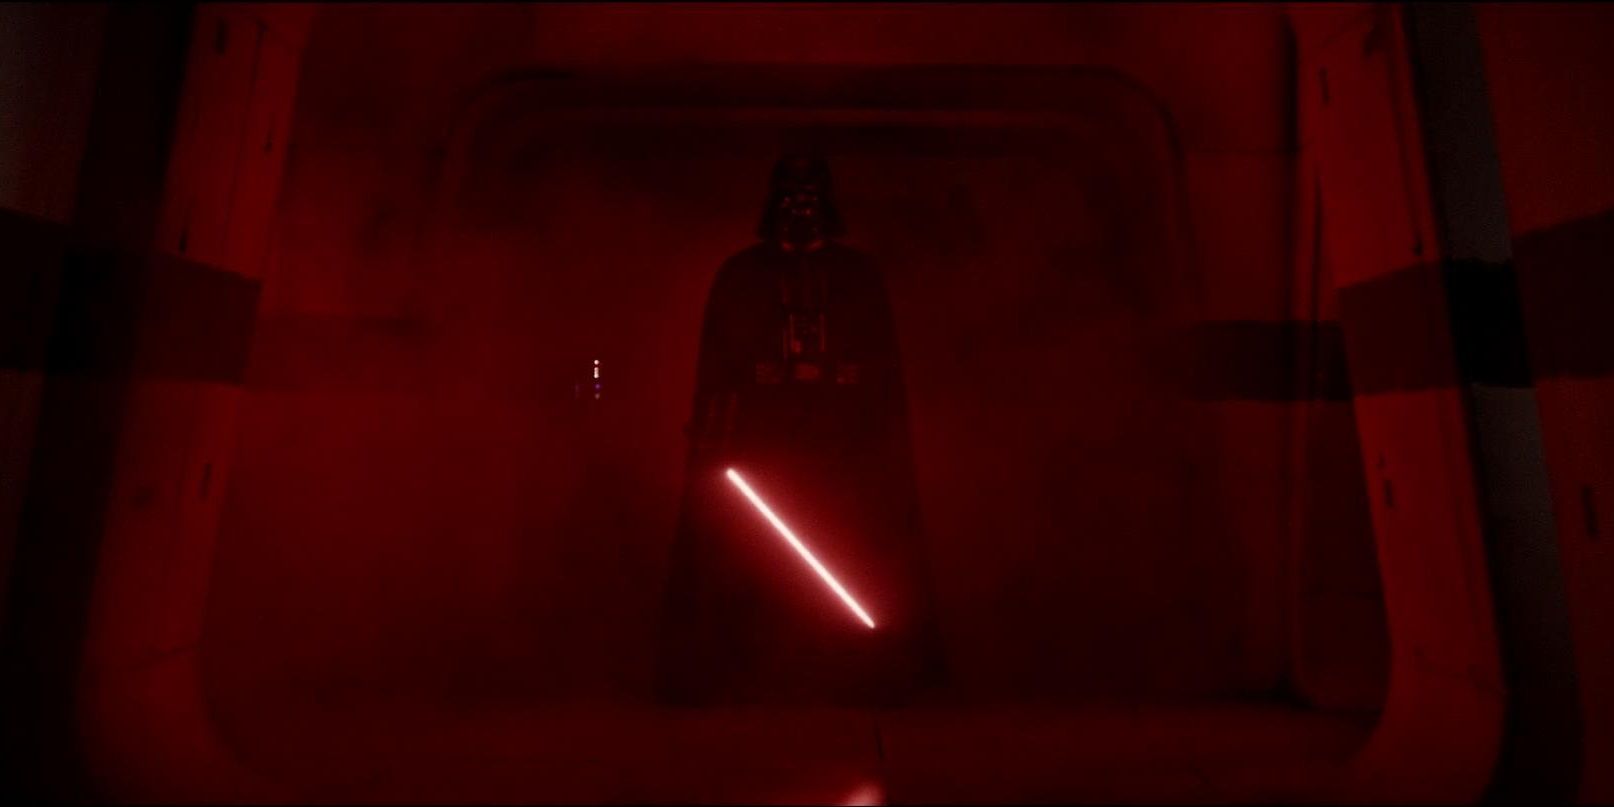 A hallway glows red from Darth Vader’s lightsaber in Rogue One